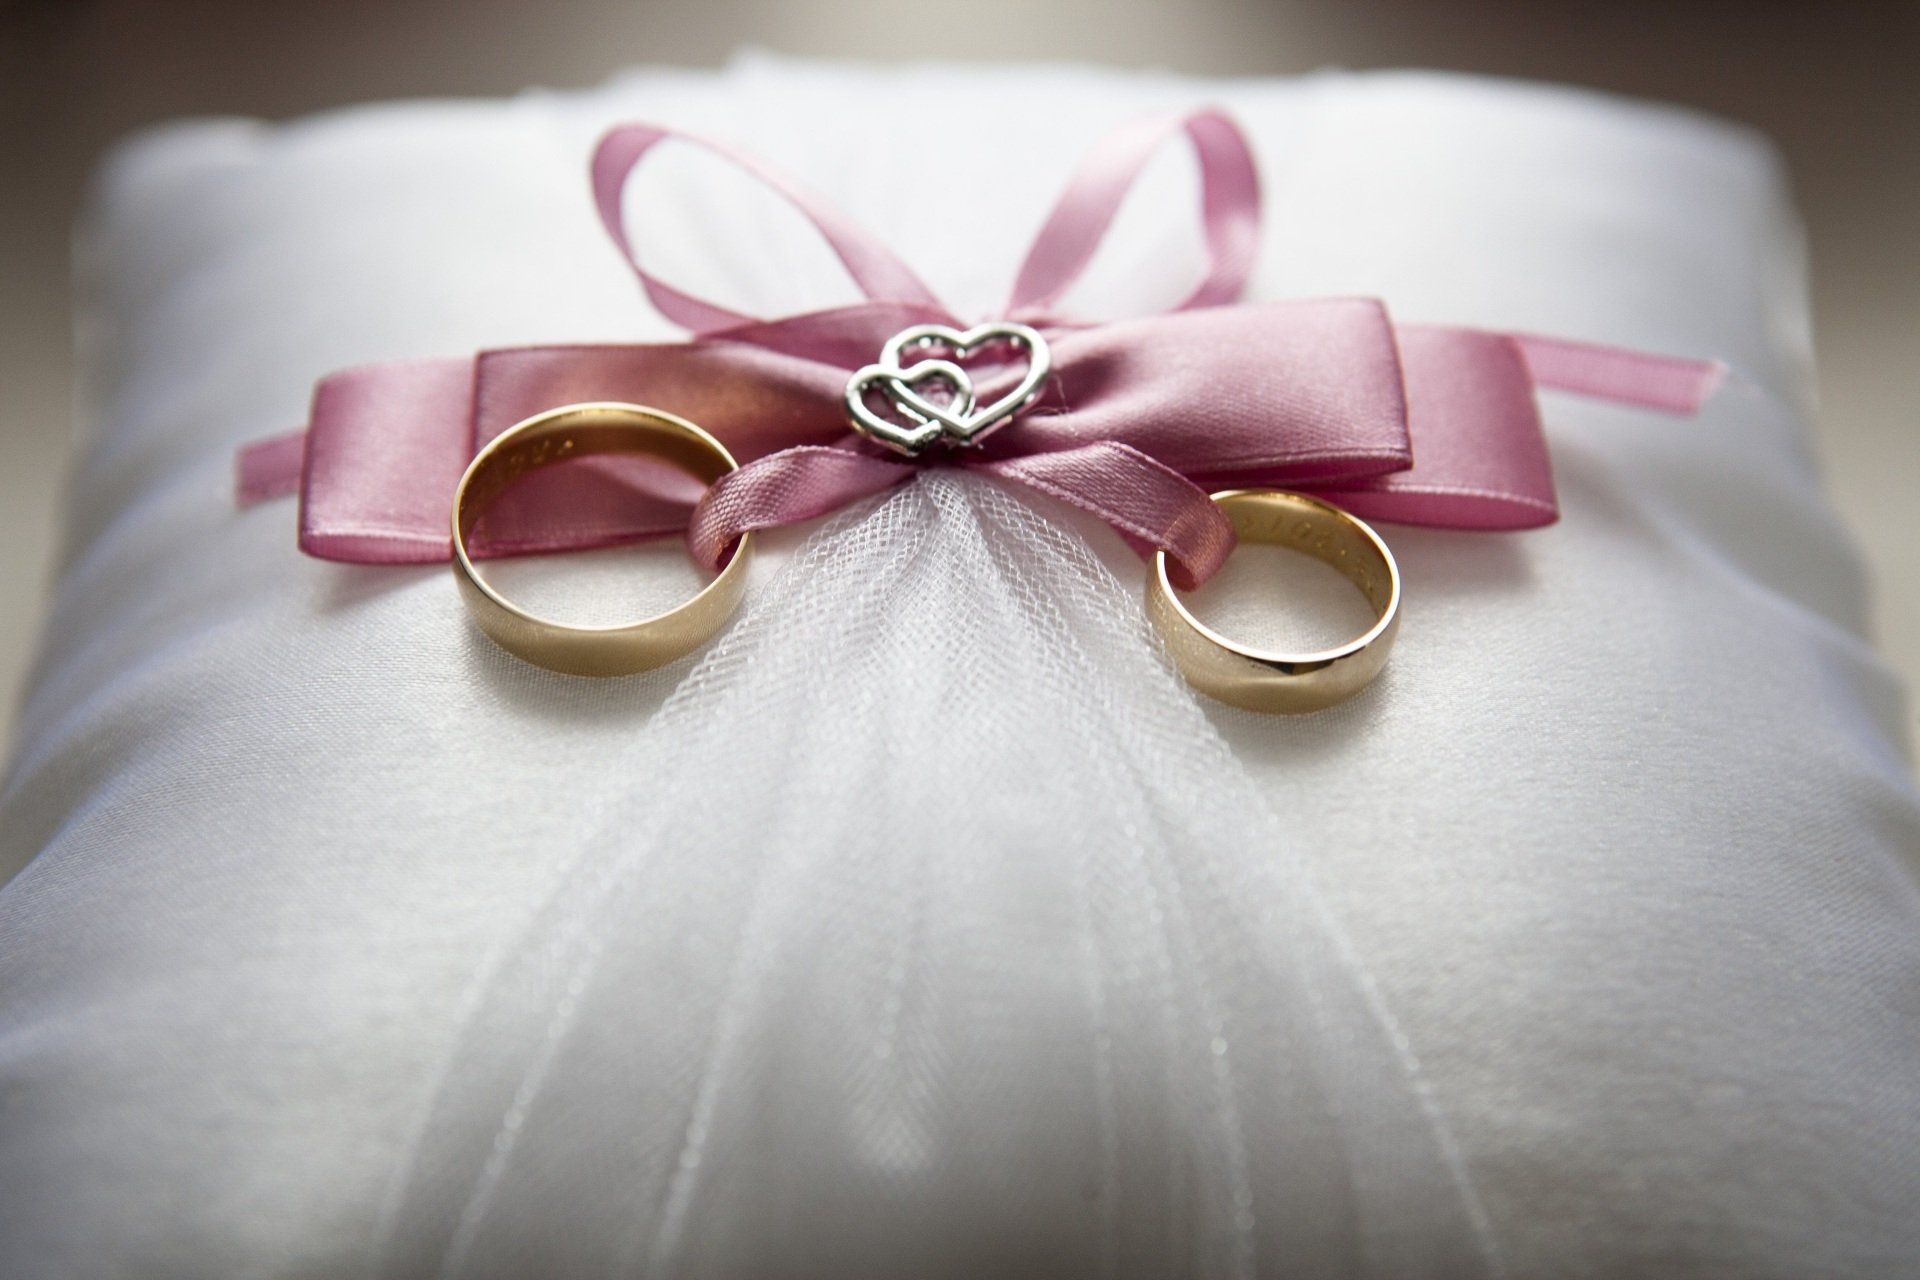 Two wedding rings are sitting on a white pillow with a pink bow.